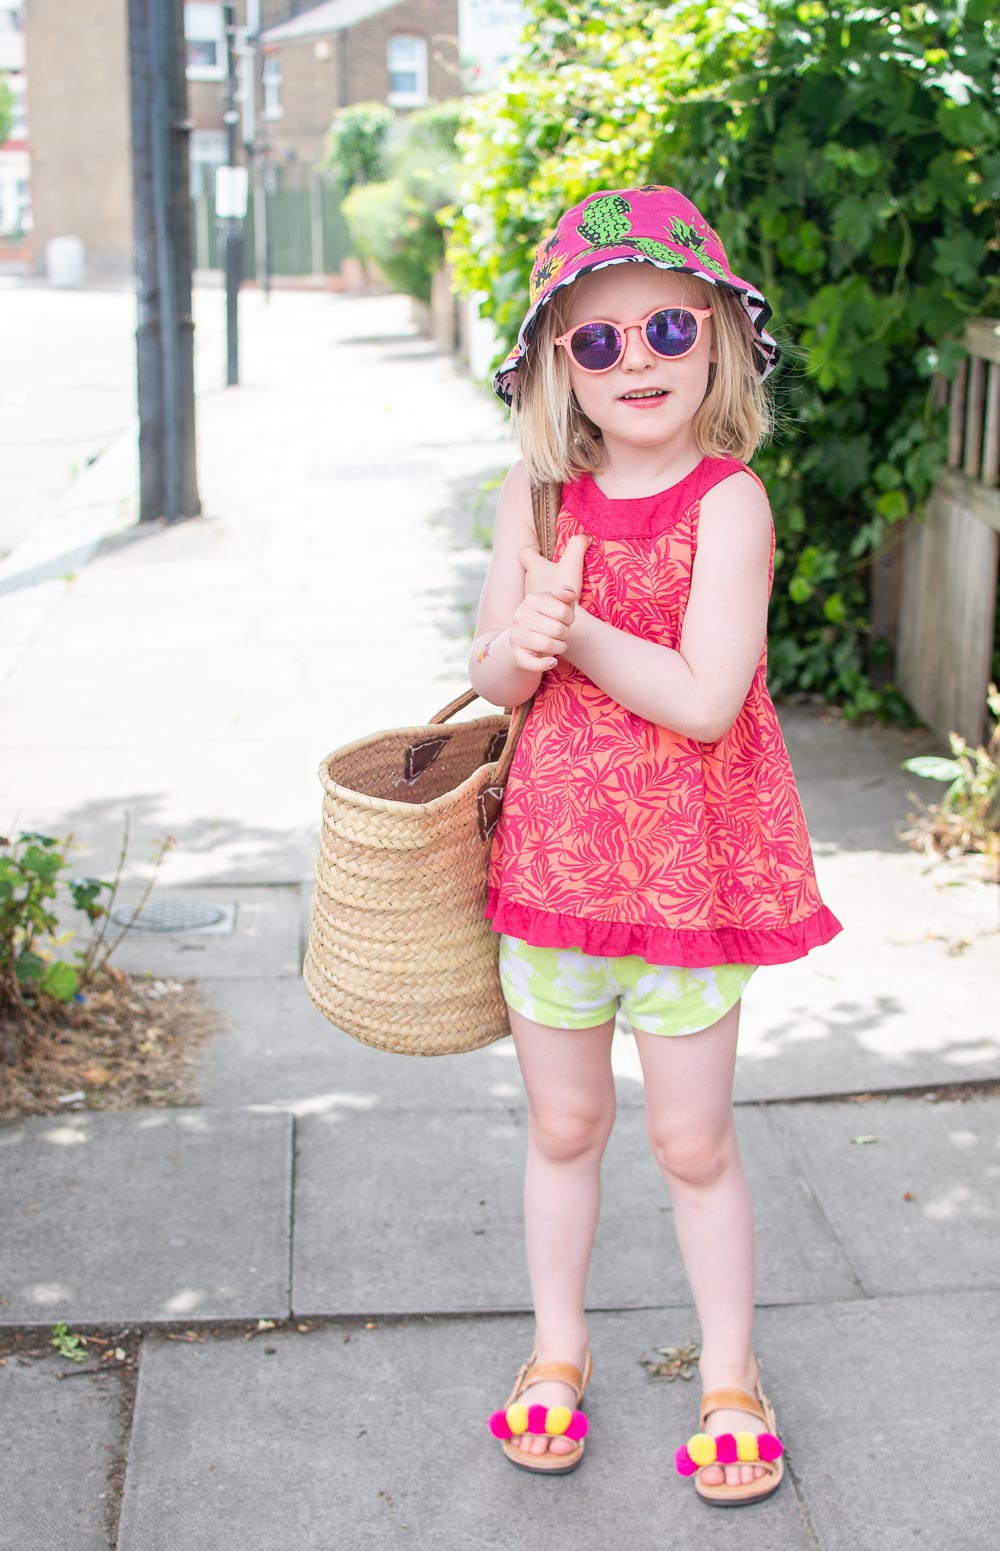 Daisy wears, pink sleeveless top from Loopster (preloved children's clothing)